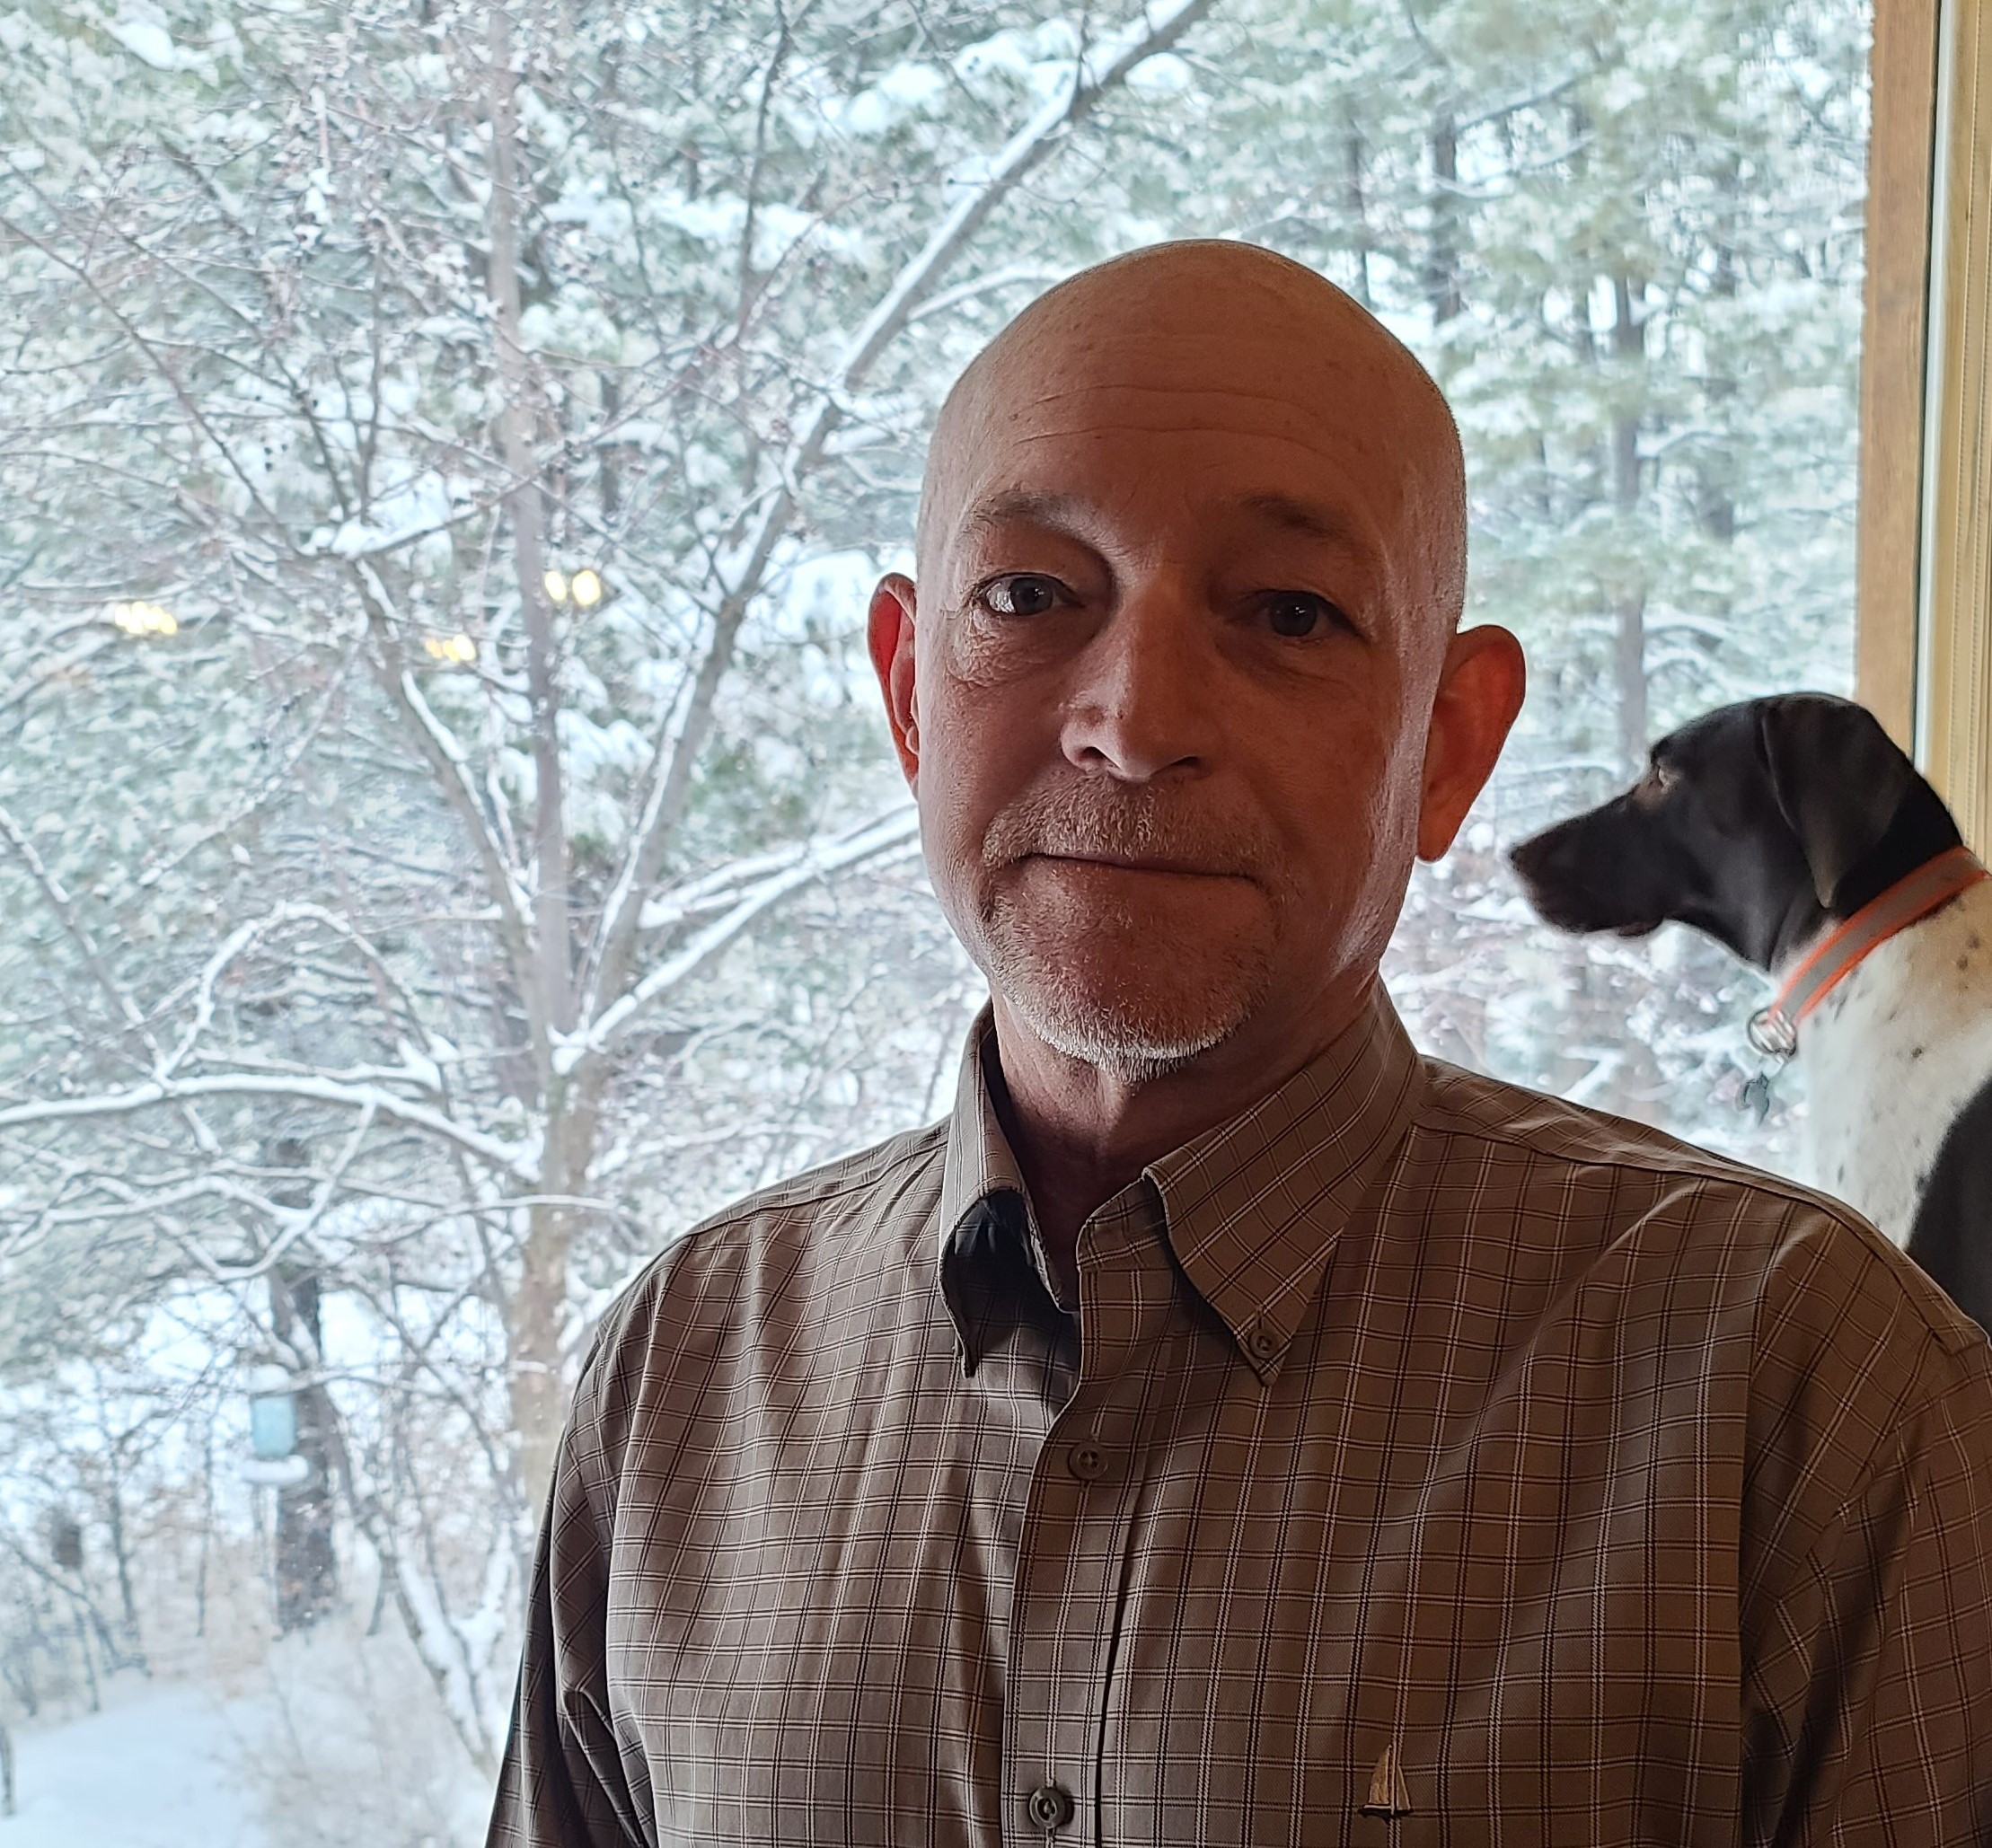 Board member David Pribble in front of a window with dog behind him.